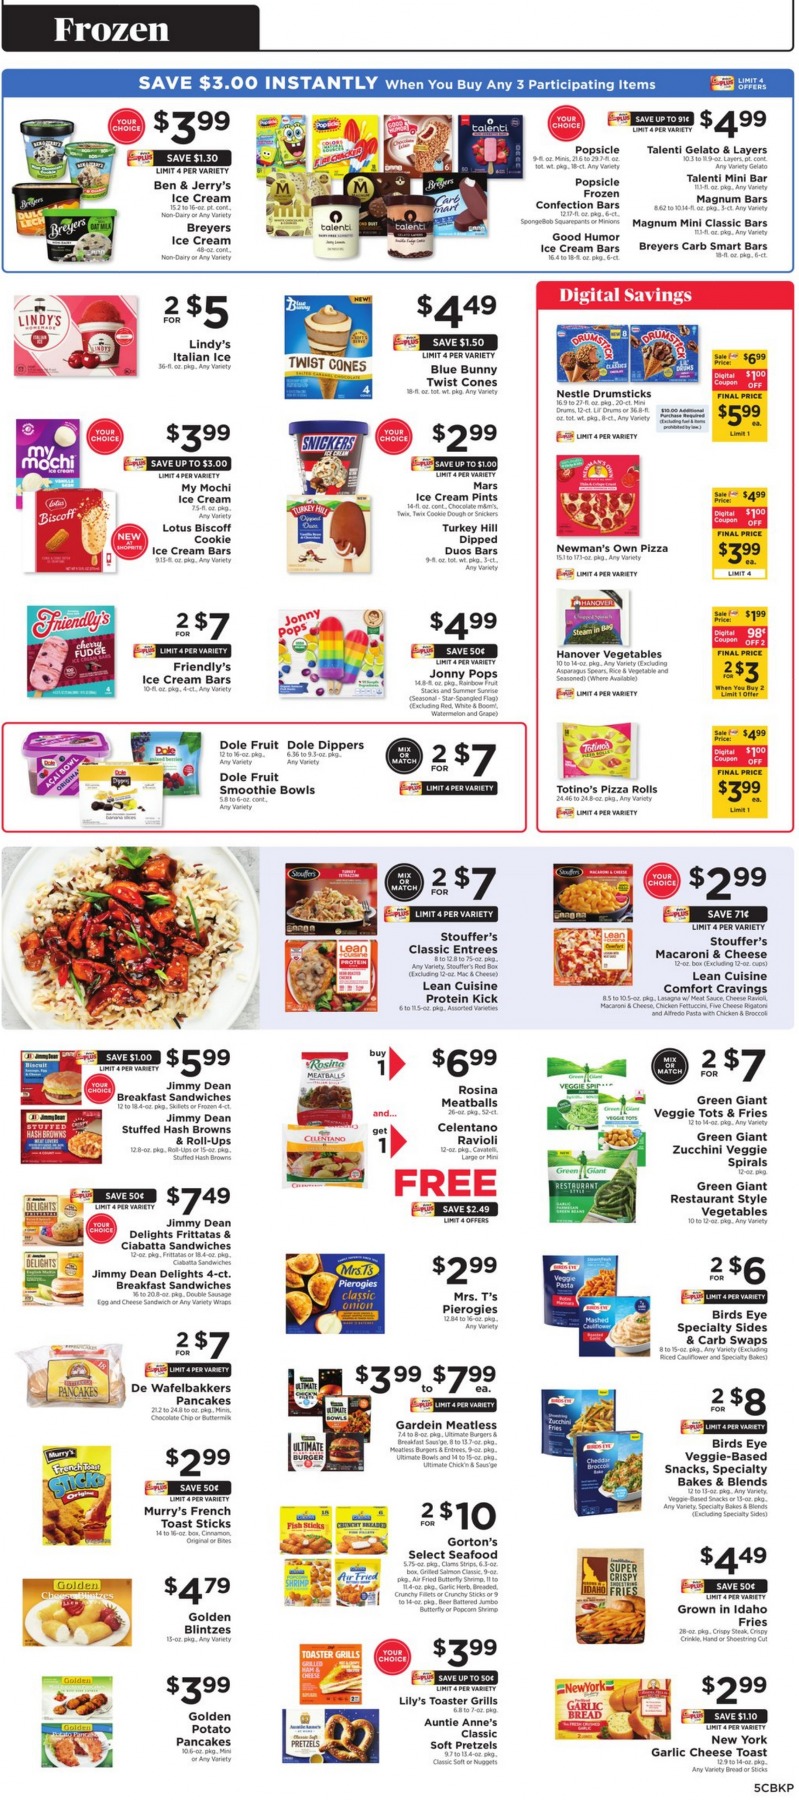 Shoprite Weekly Ad July 2024 Weekly Sales, Deals, Discounts and Digital Coupons.